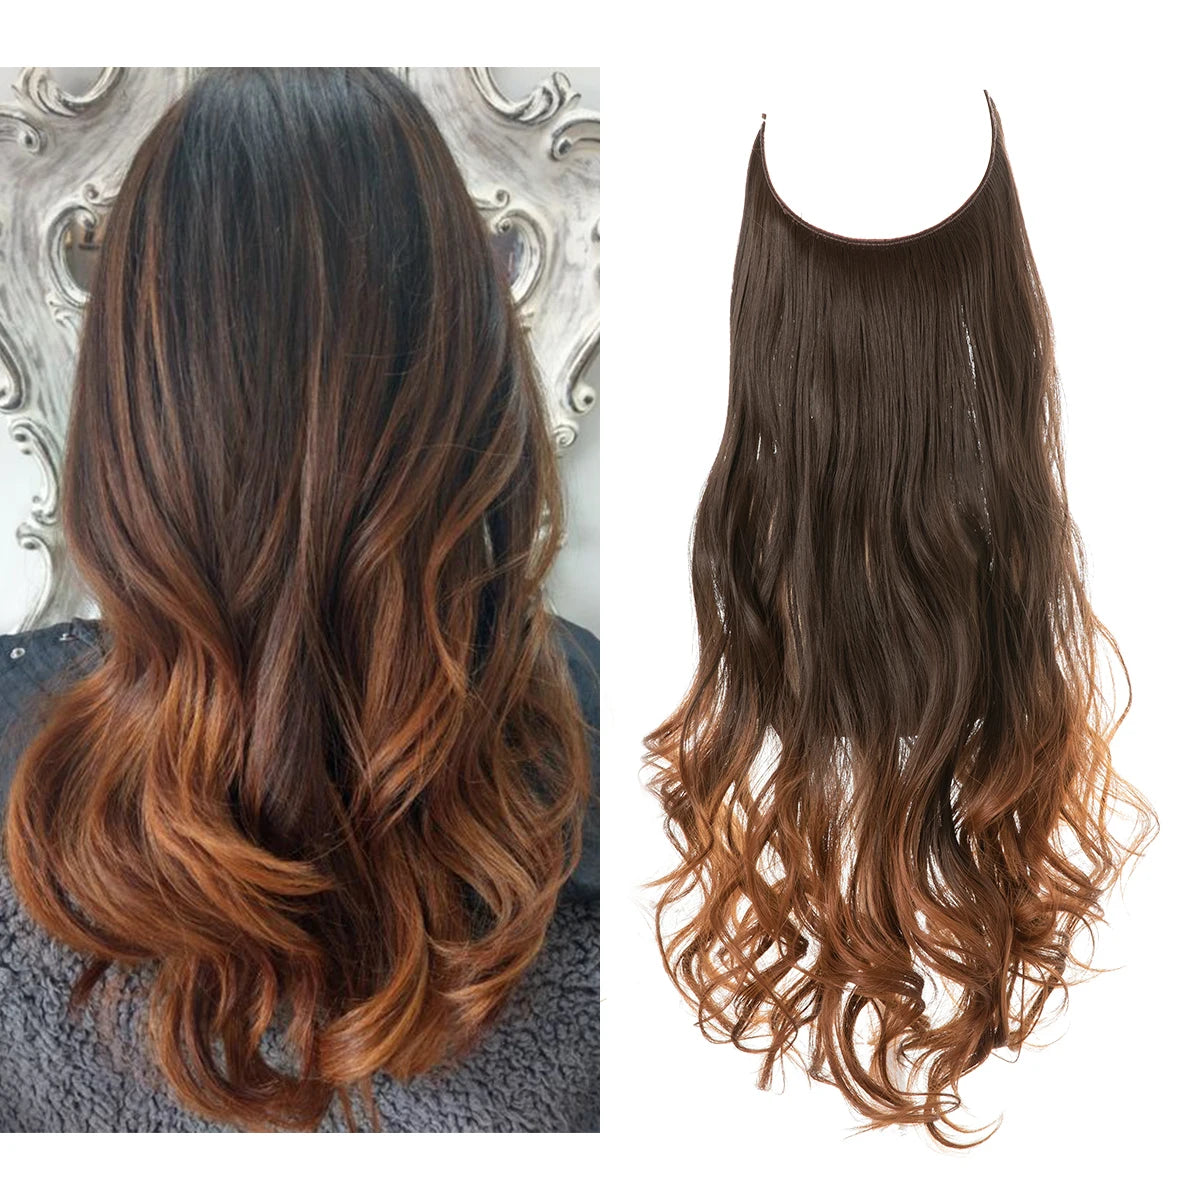 Artificial Hair Extensions with Natural Color Gradients and Waves